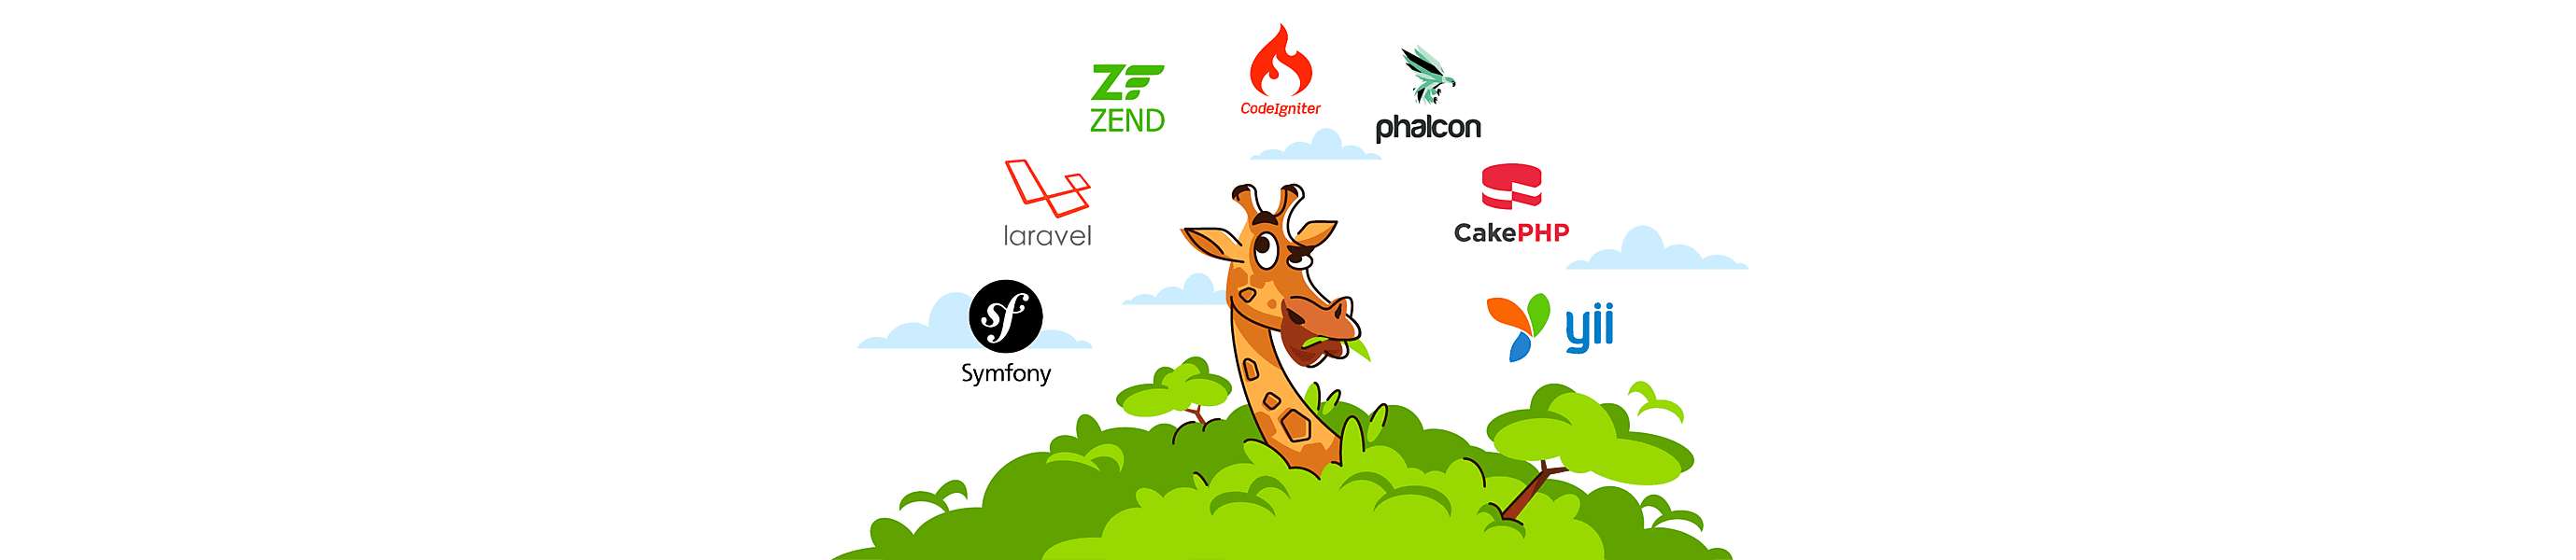 Best PHP Frameworks in Use Today